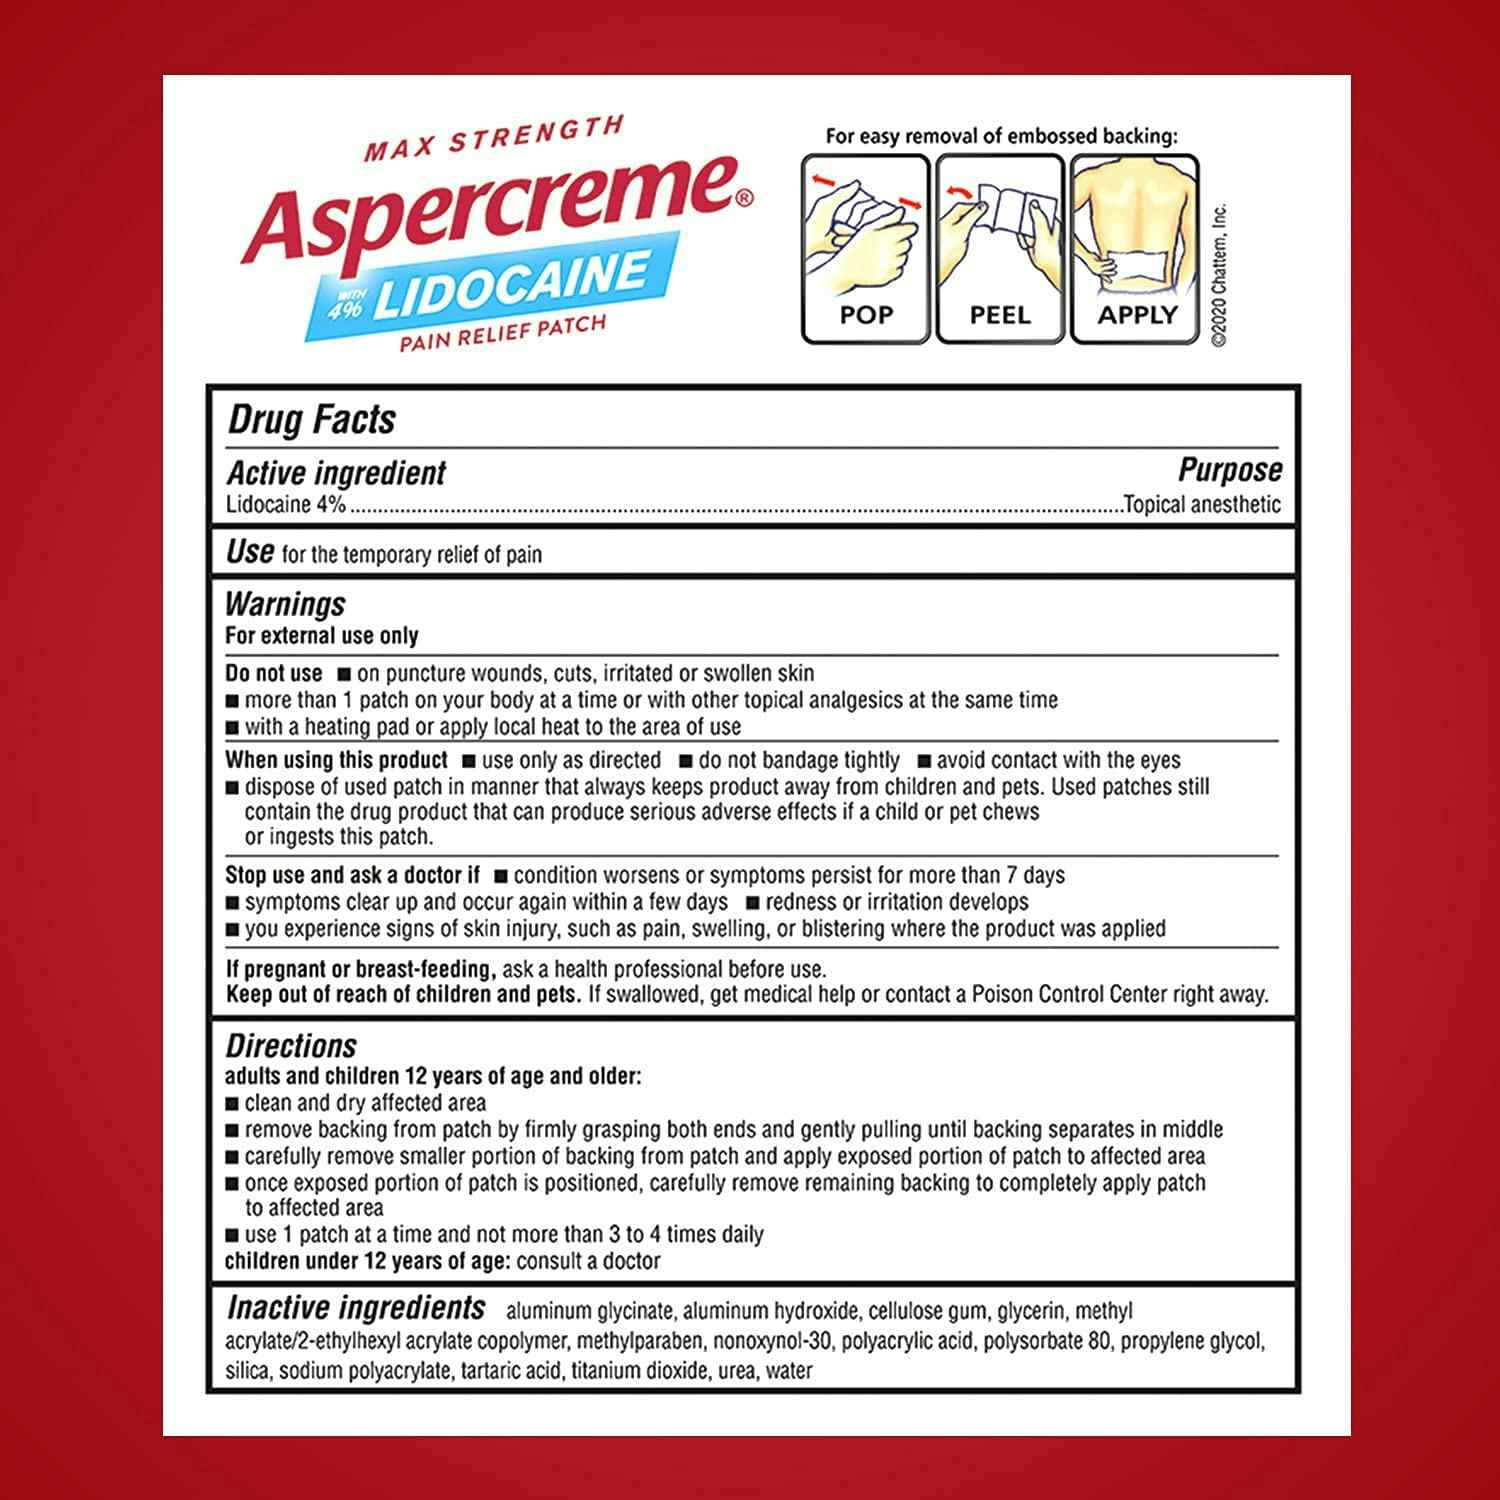 Image of Aspercreme Odor Free Lidocaine Patch, 4% Strength packaging back